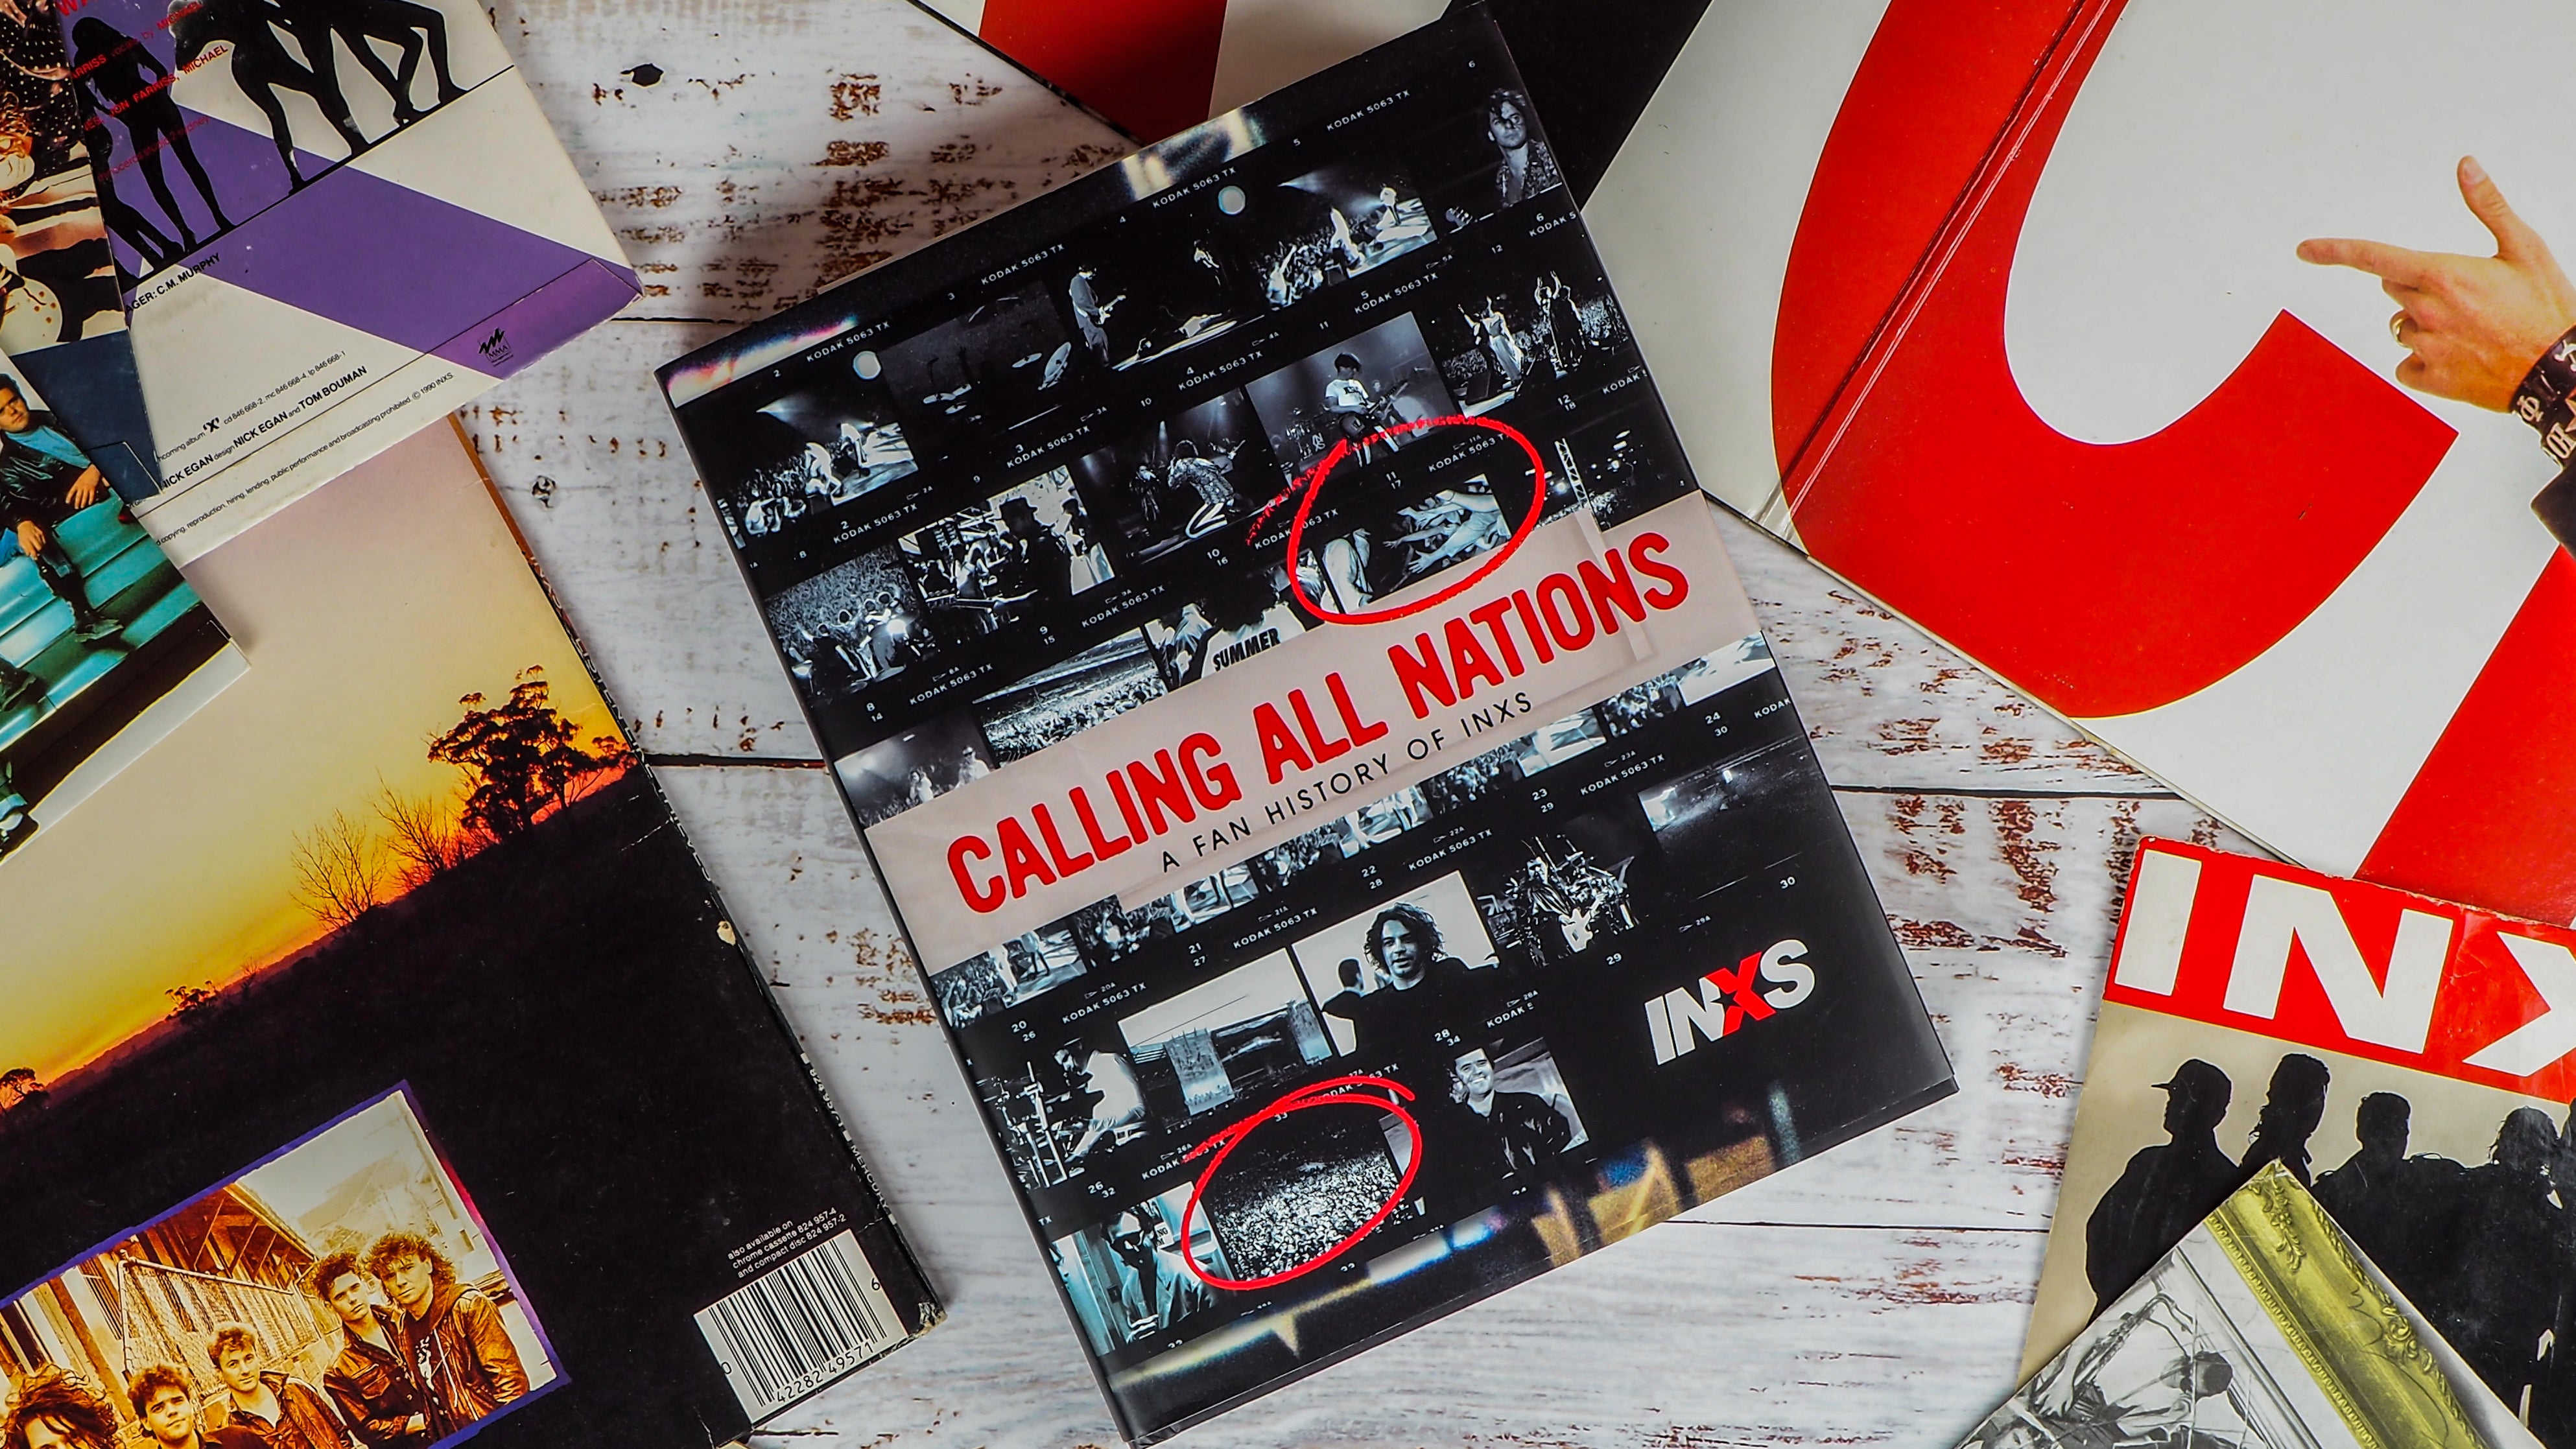 Calling All Nations: A Fan History of INXS (Deluxe Edition Book) Detail 1